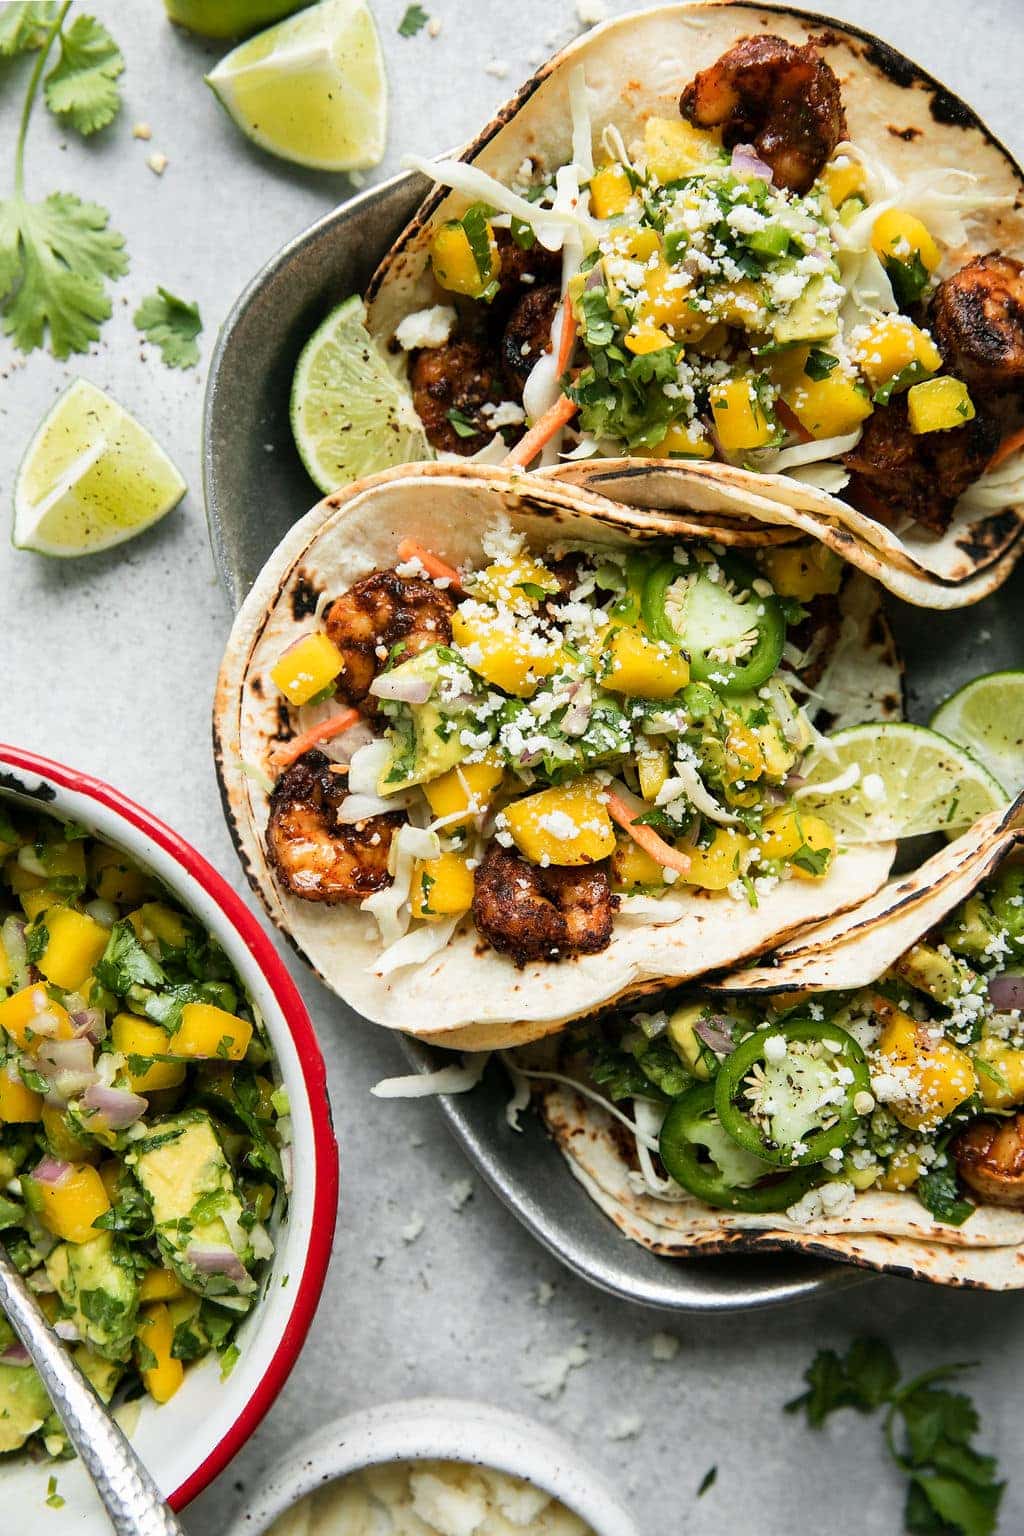 Grilled Shrimp Tacos with Mango and Avocado Salsa on a plate ready to be served - one of the recipes for this week's healthy weekly meal plan